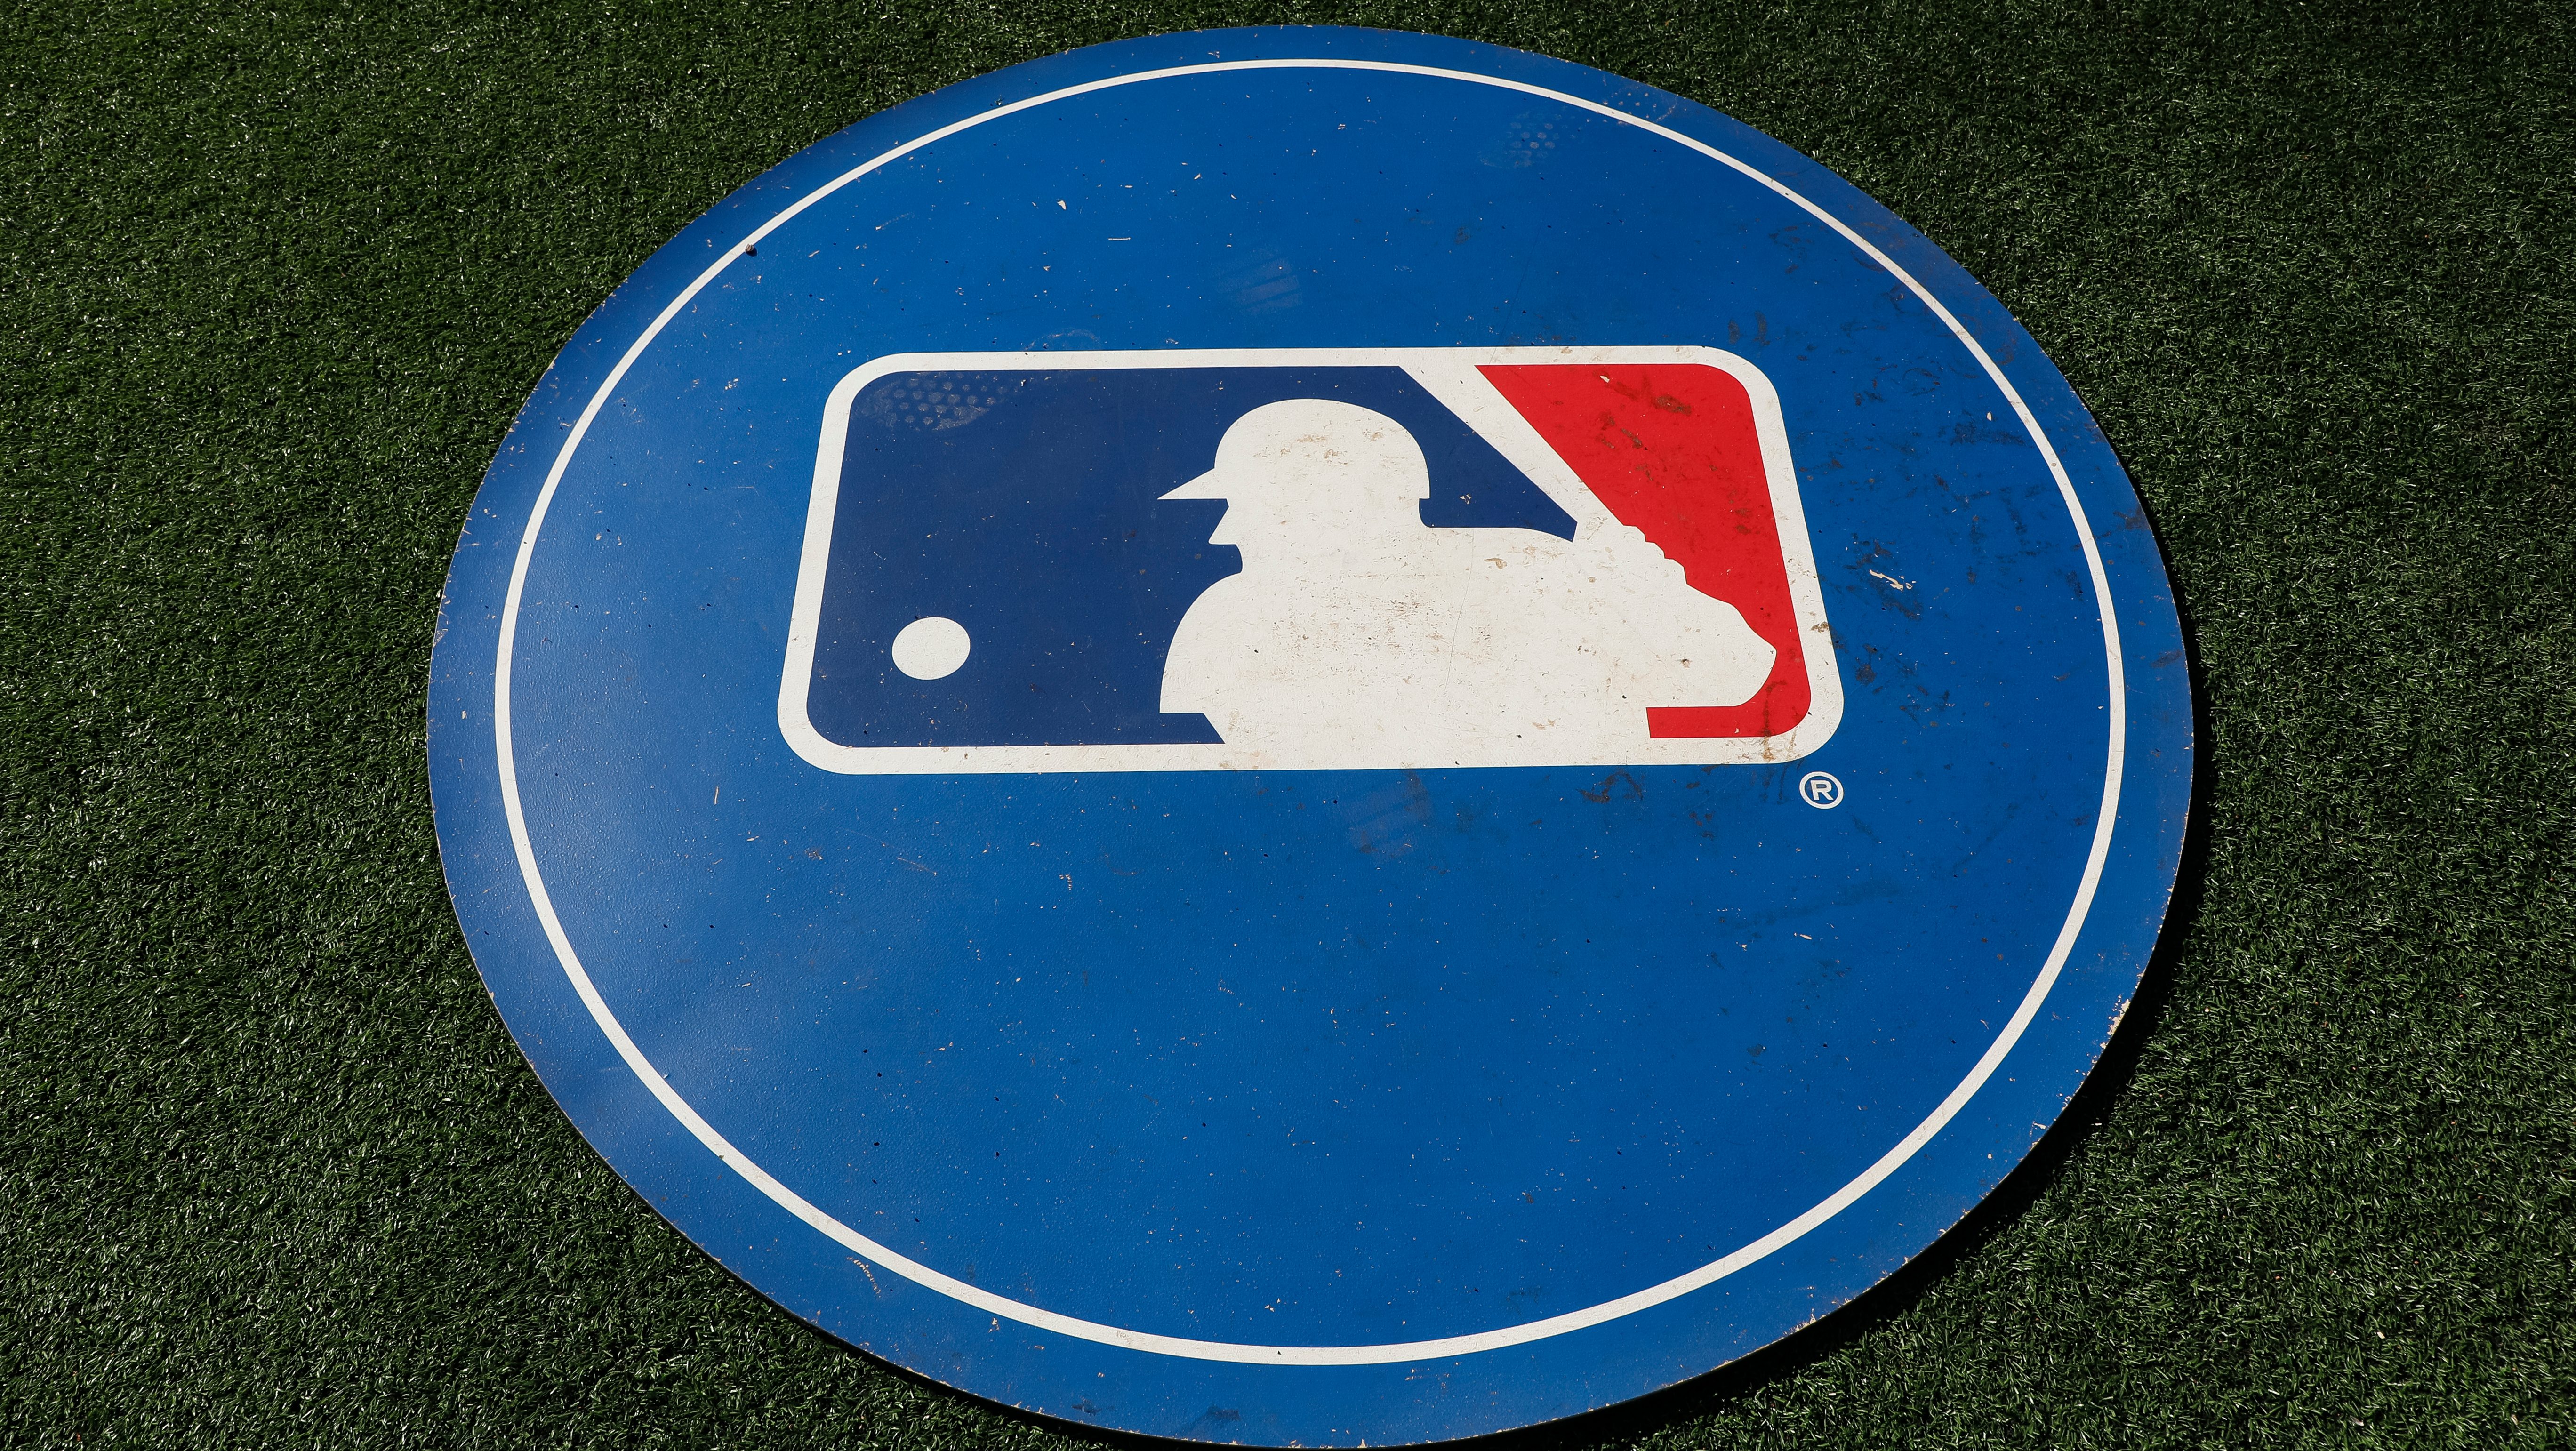 Ex-minor league umpire sues MLB claiming he was harassed by female ump
and fired for being bisexual